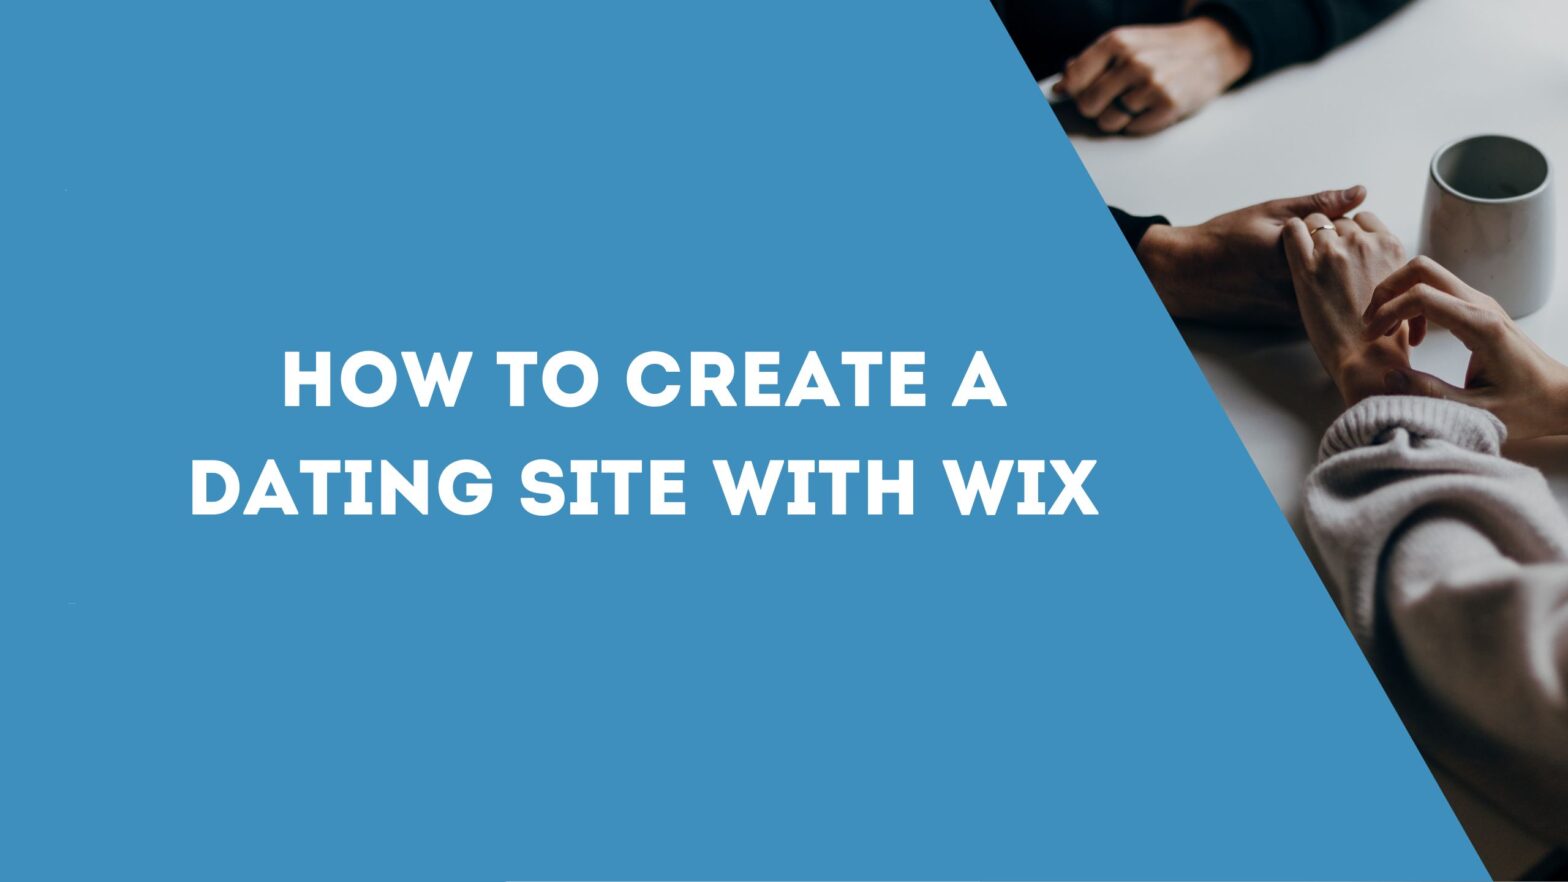 How to Create a Dating Site with Wix